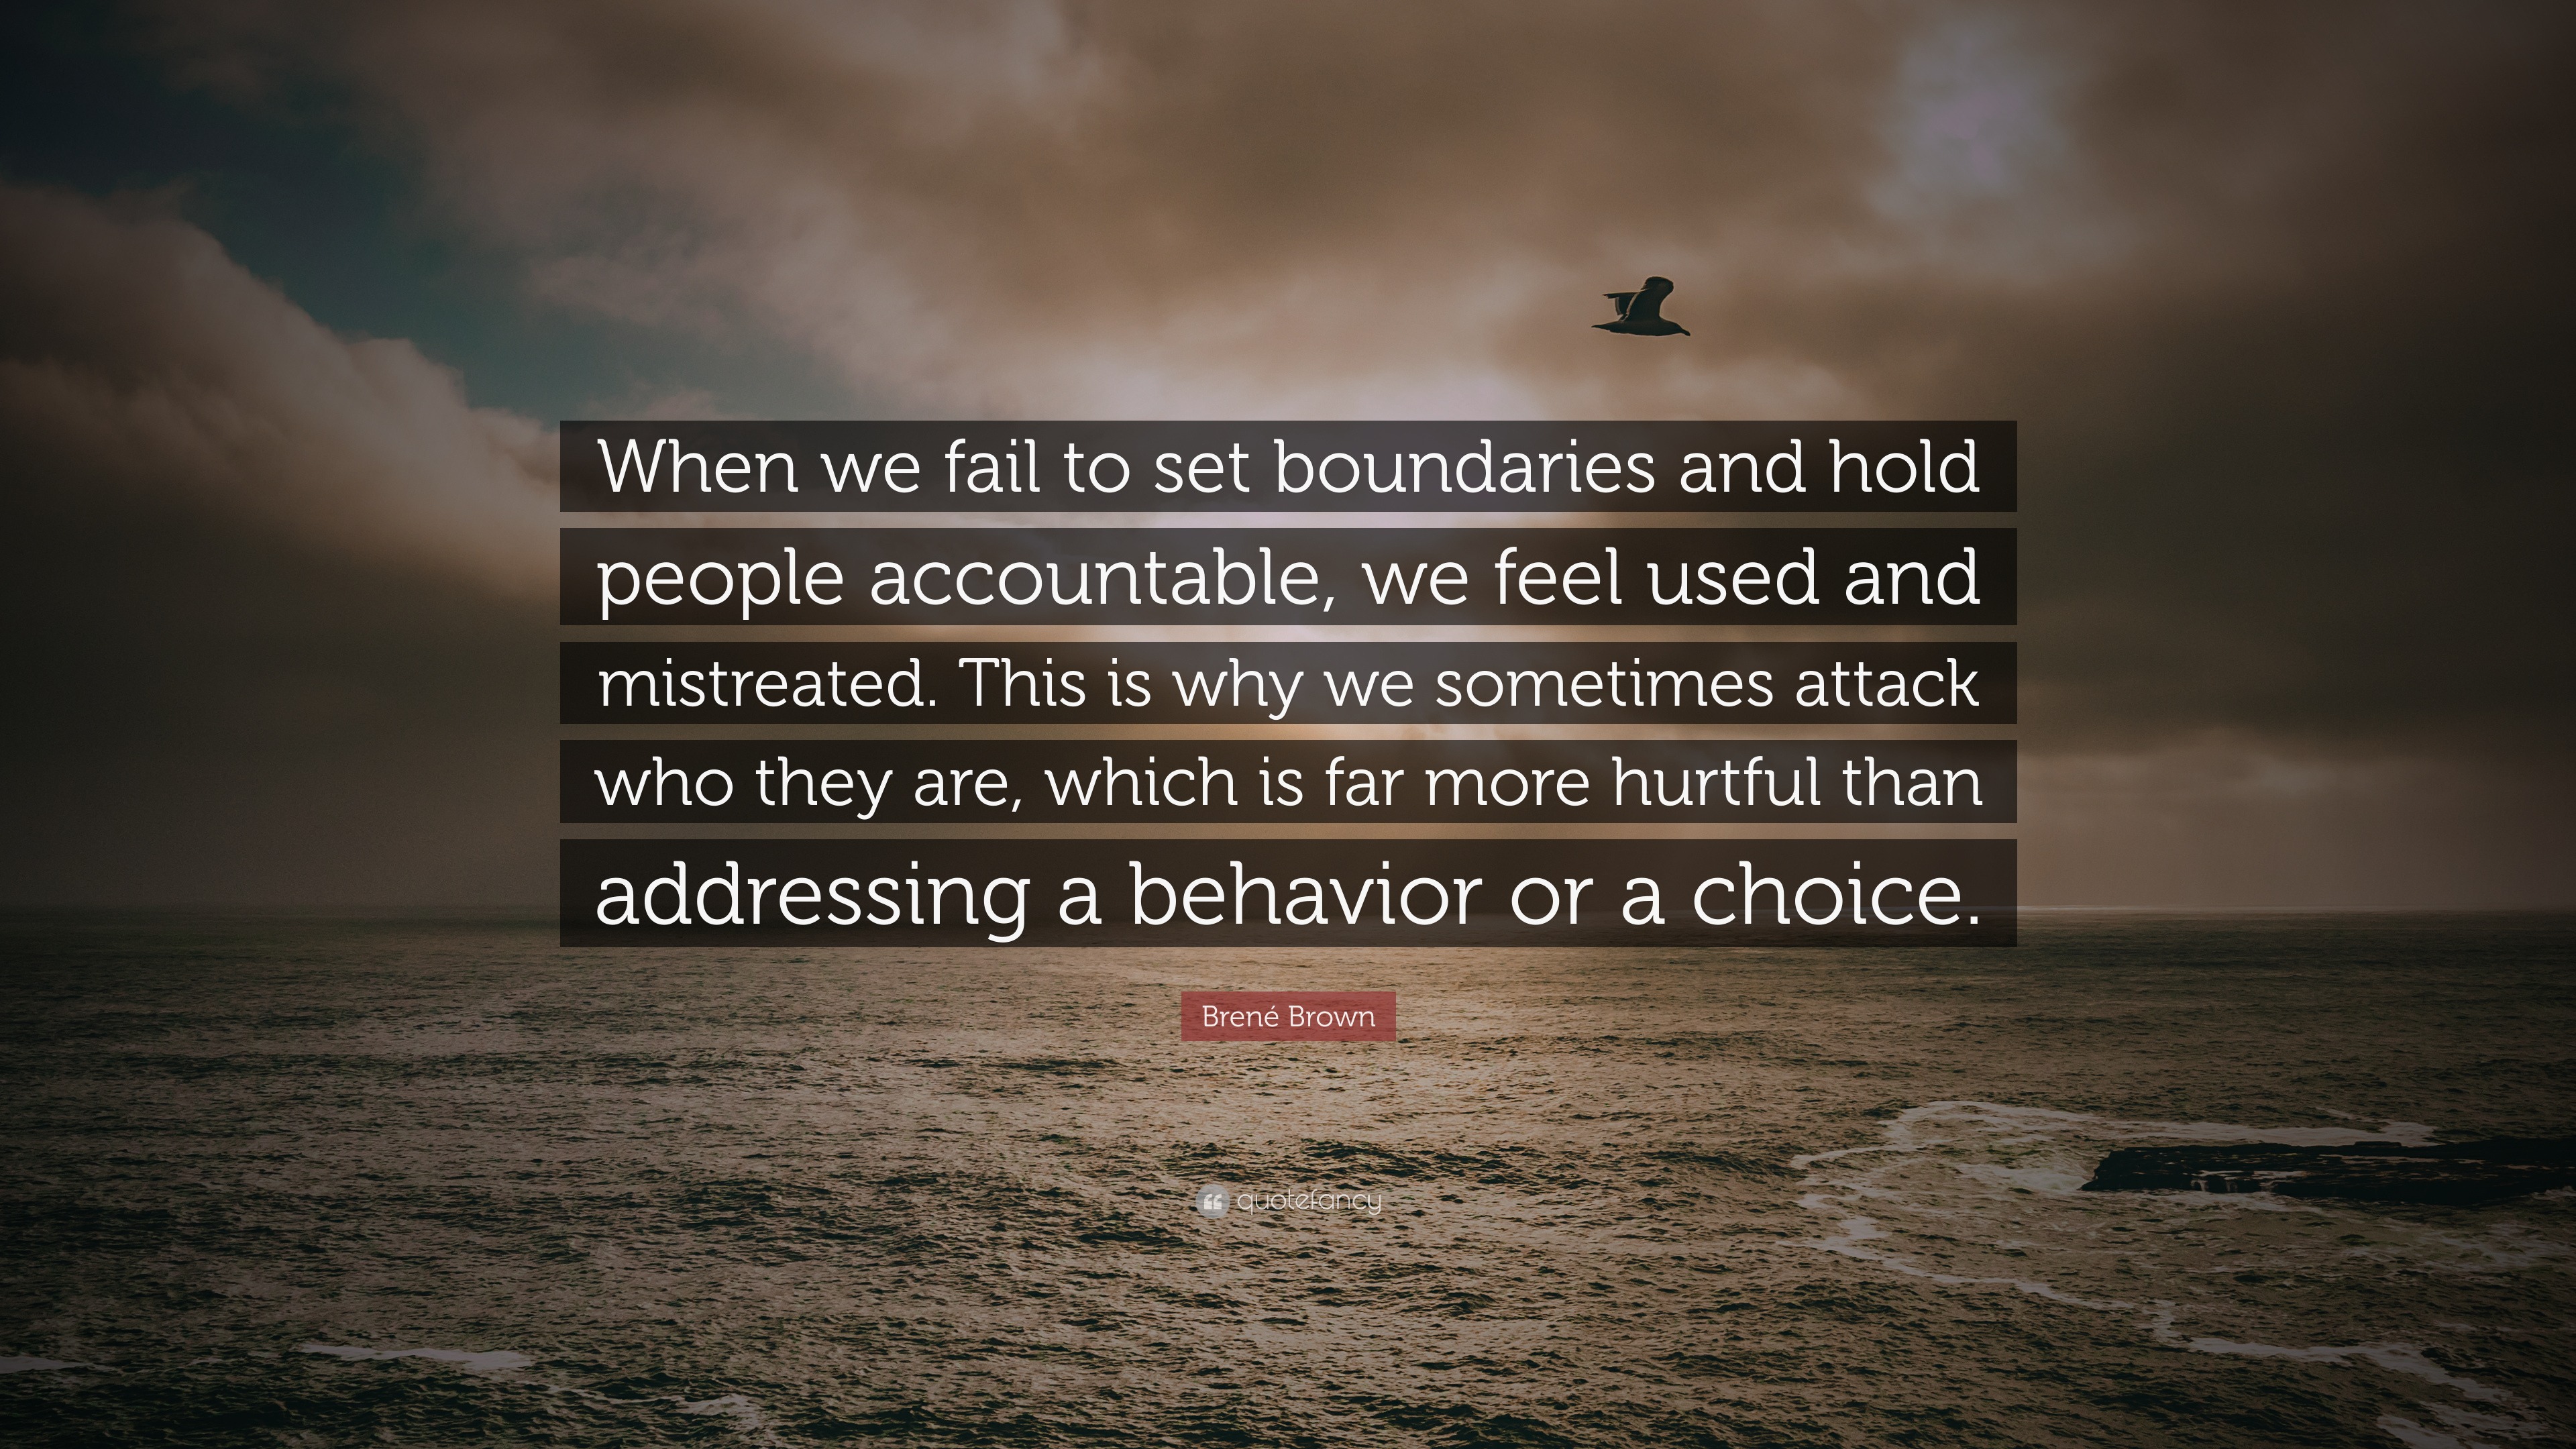 Brené Brown Quote: “When we fail to set boundaries and hold people